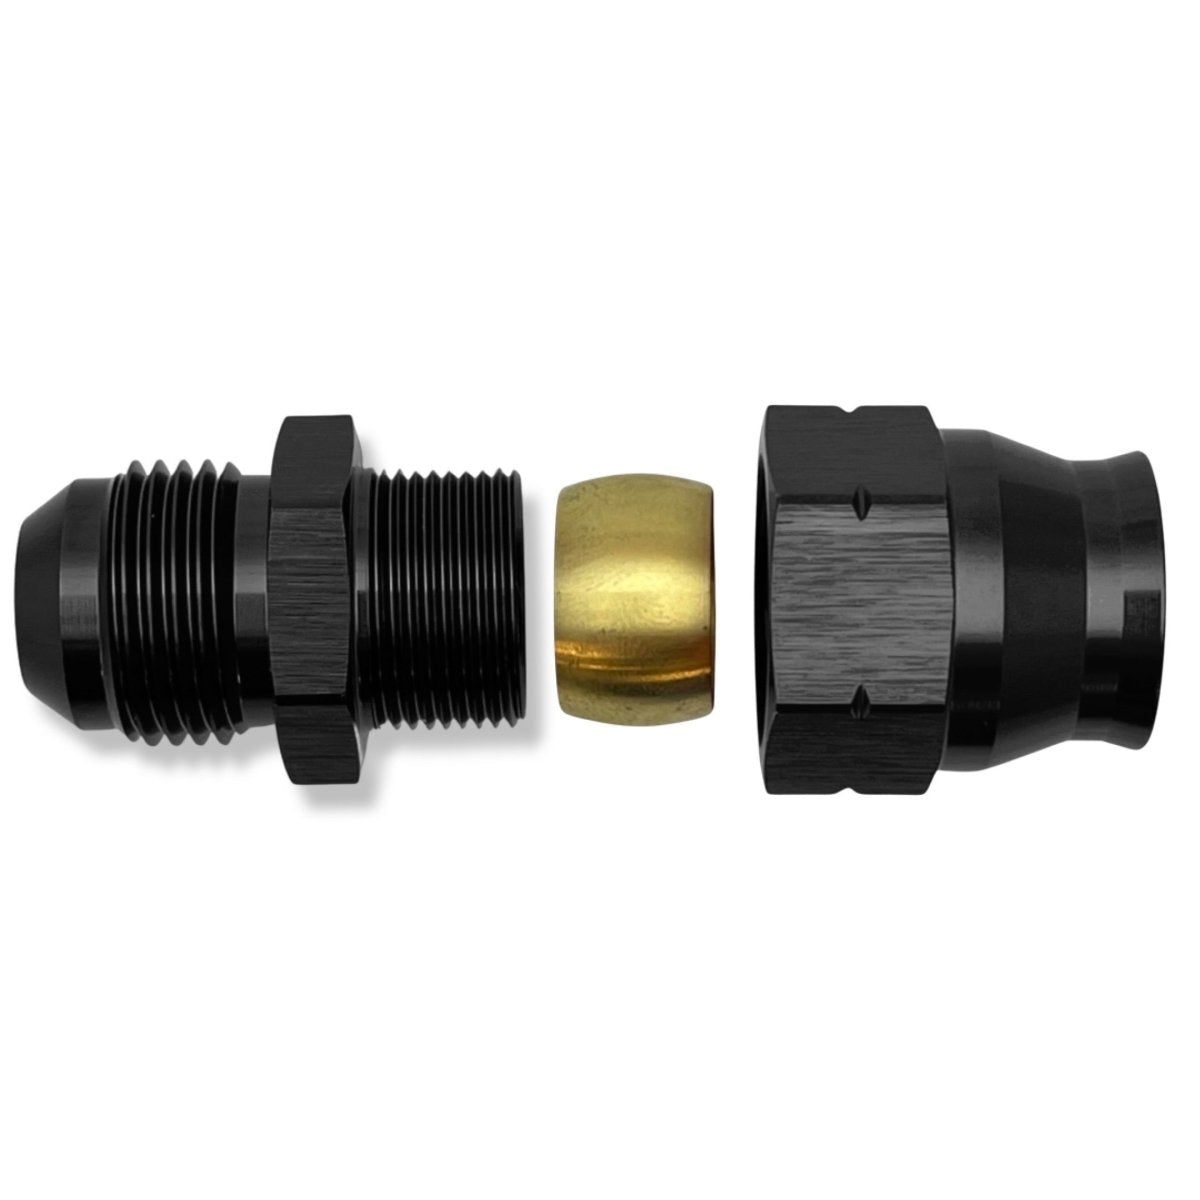 -8 AN MALE TO 1/2" TUBING - BLACK - 165008BK by AN3 Parts